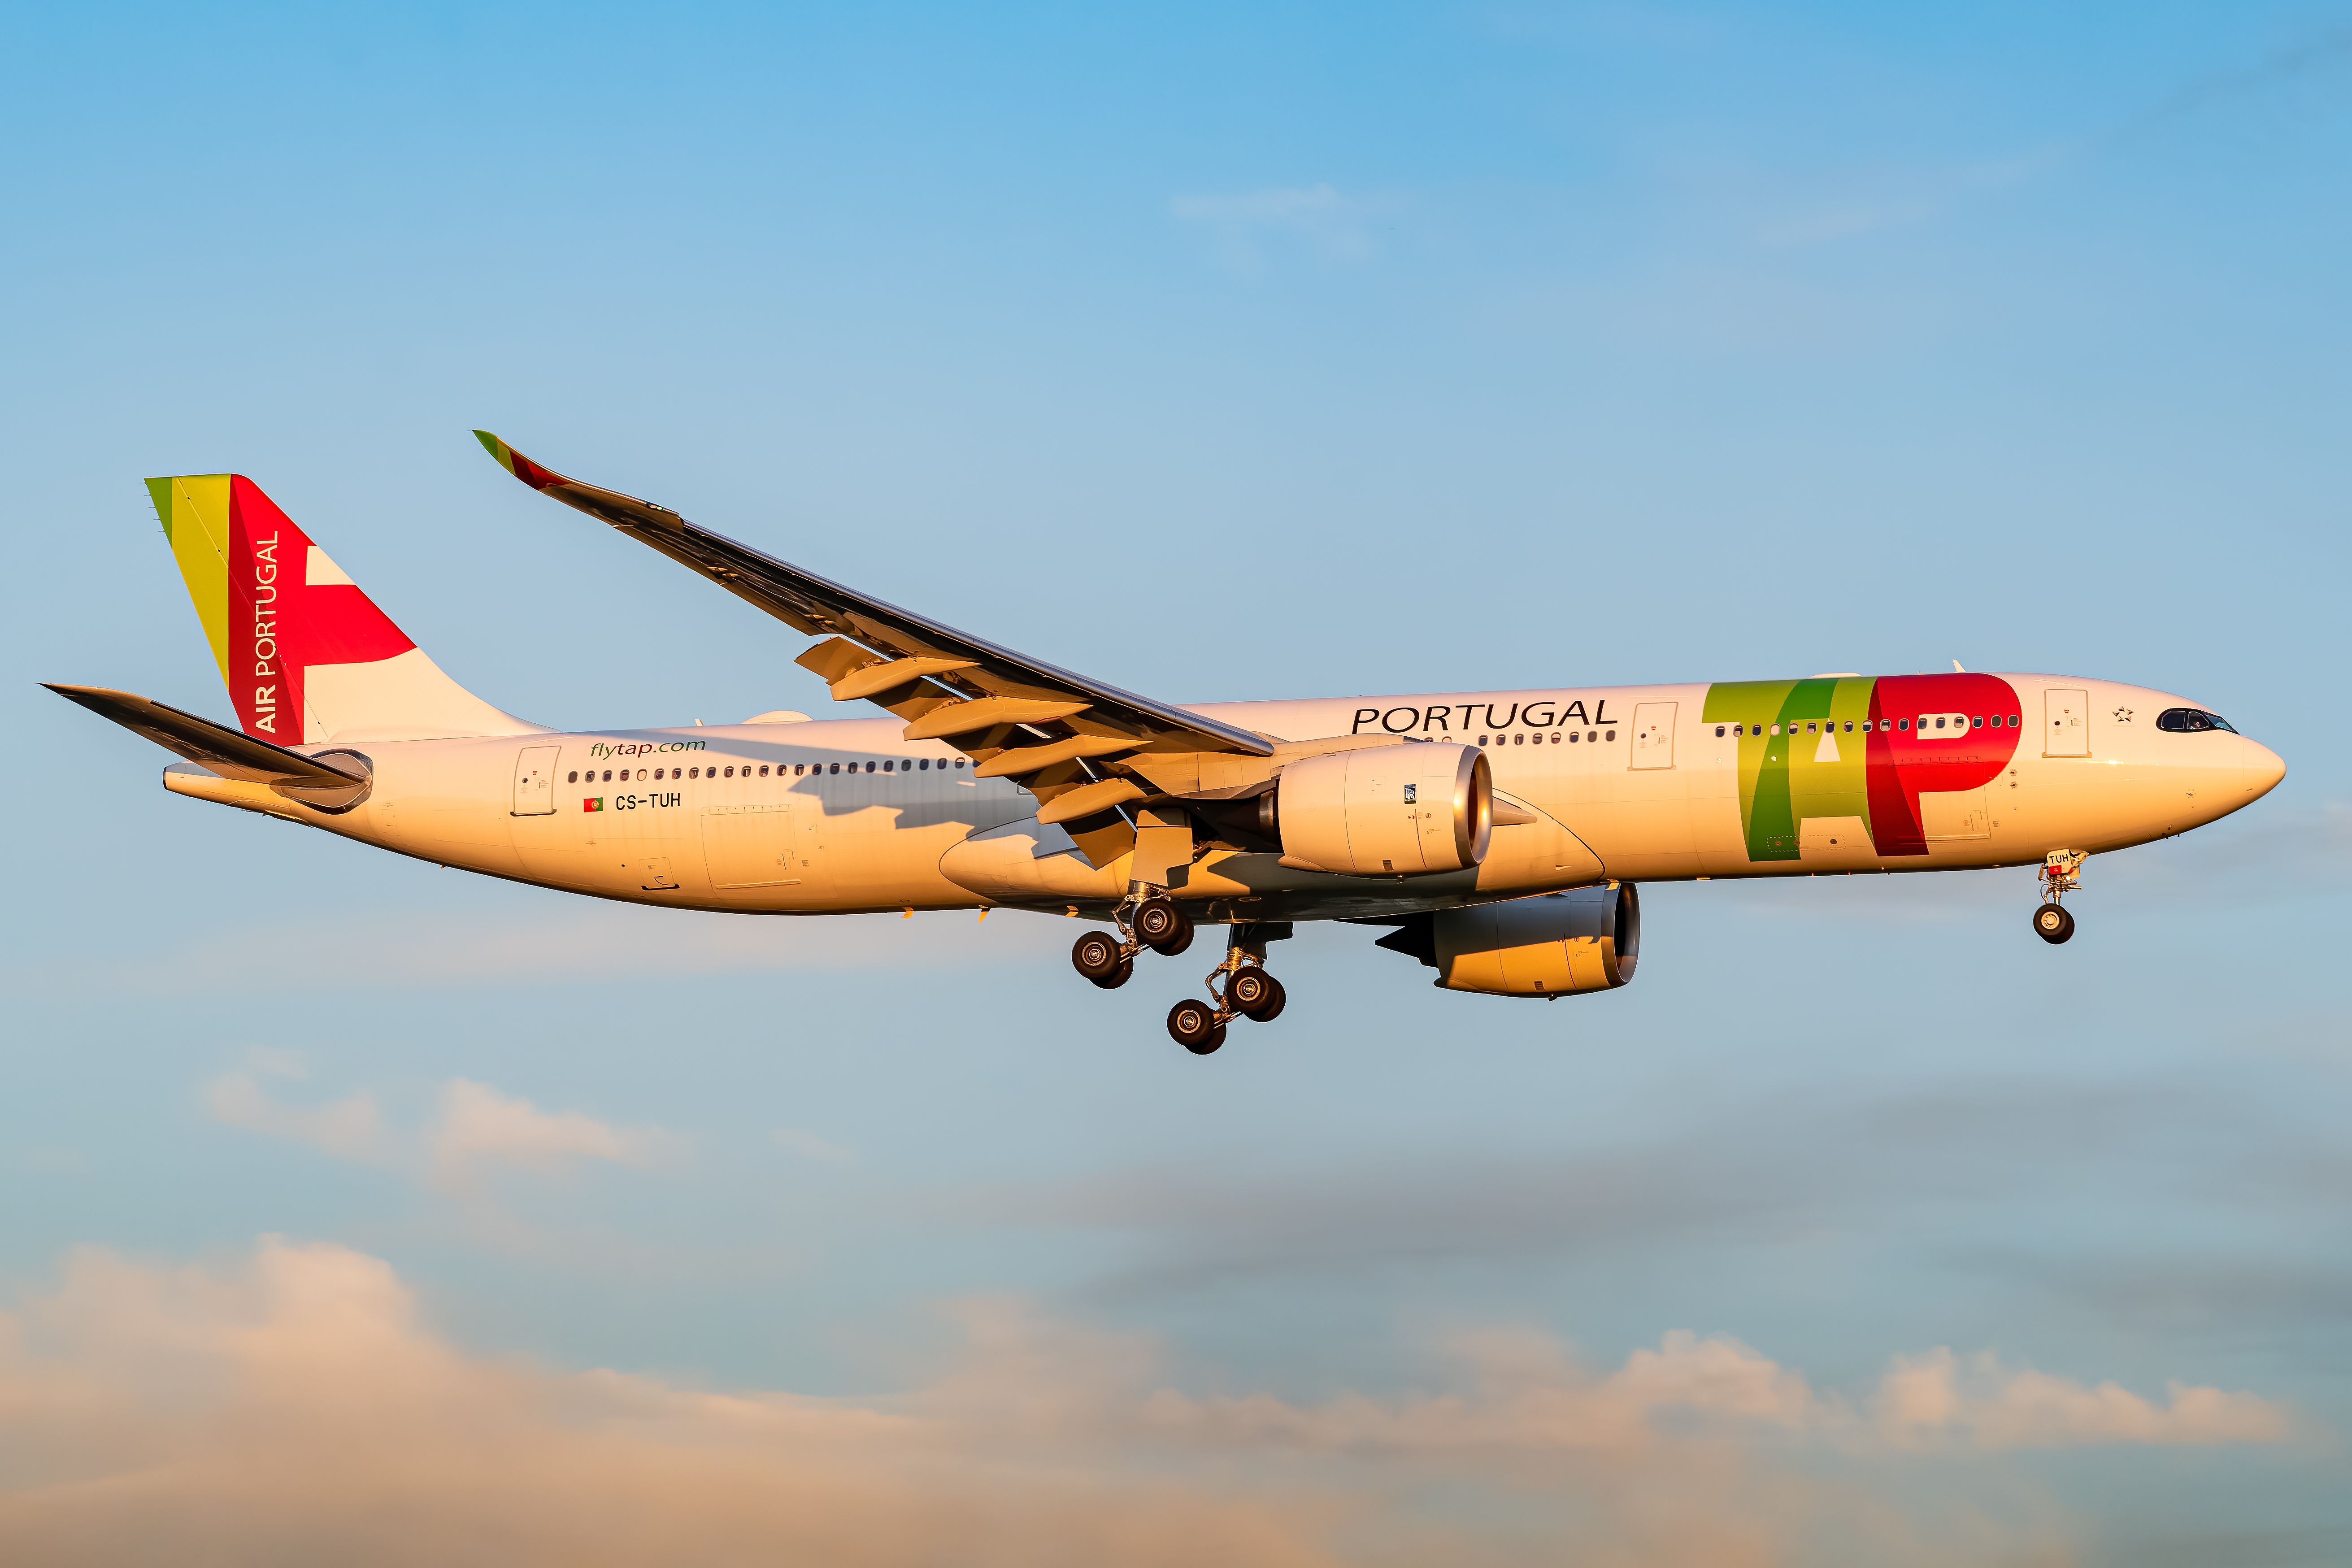 A TAP Air Portugal Airbus A330-900 flying in the sky.